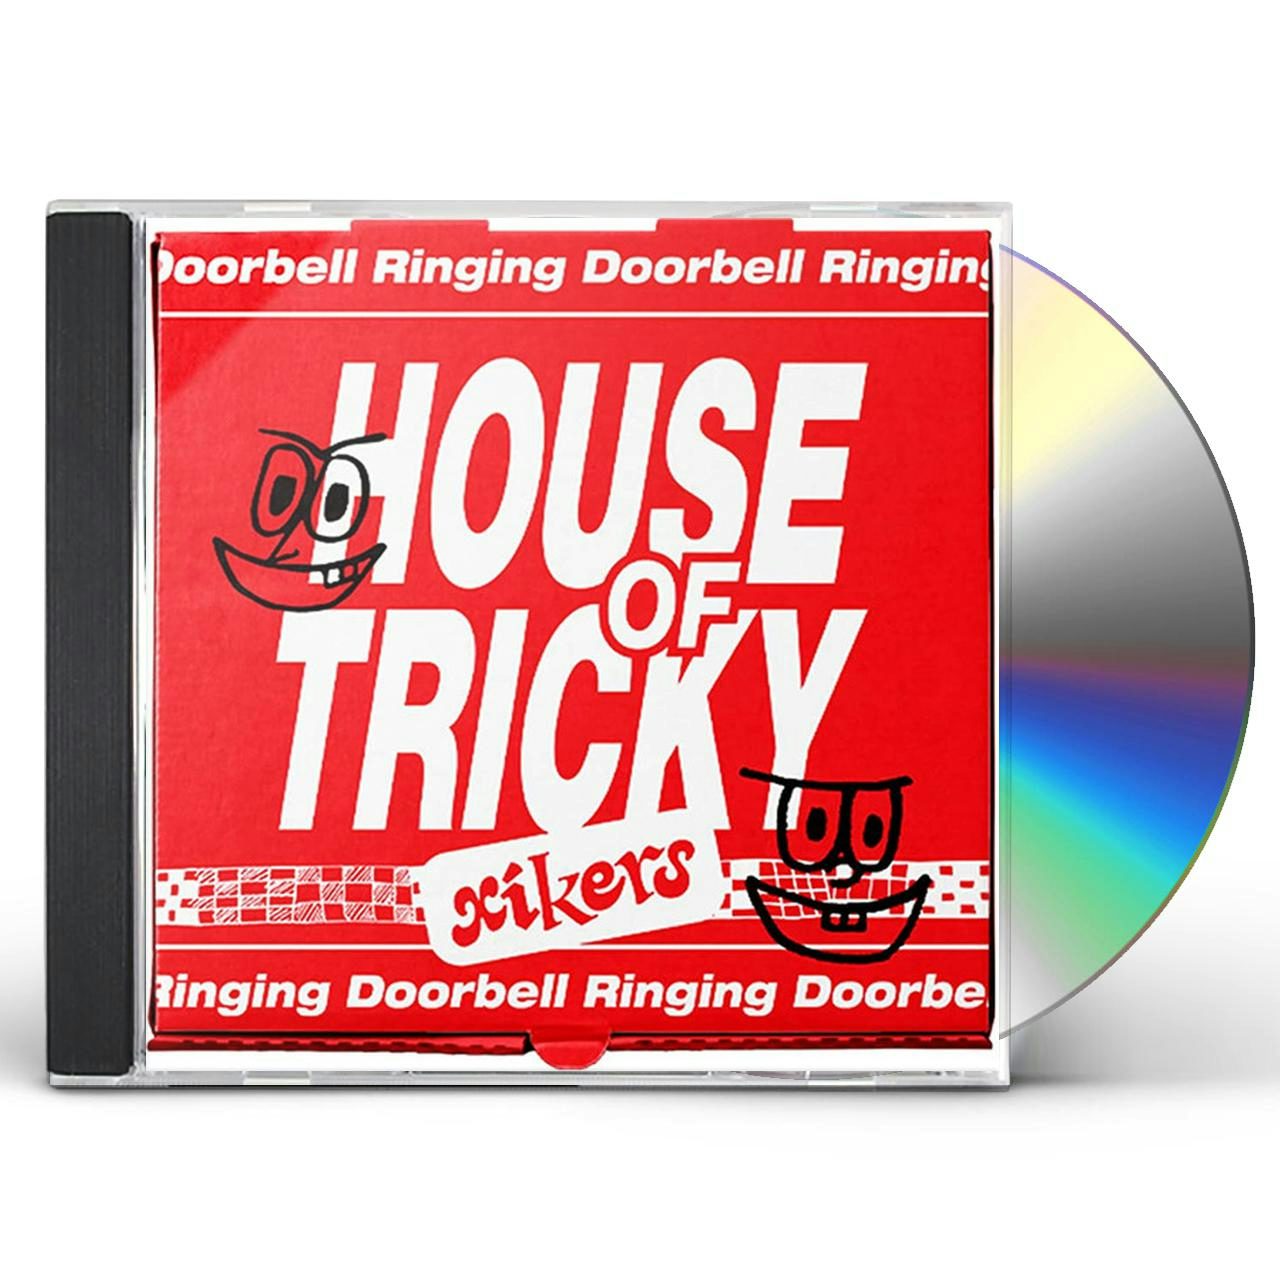 Please No Soliciting Video Doorbell Surround - Etsy